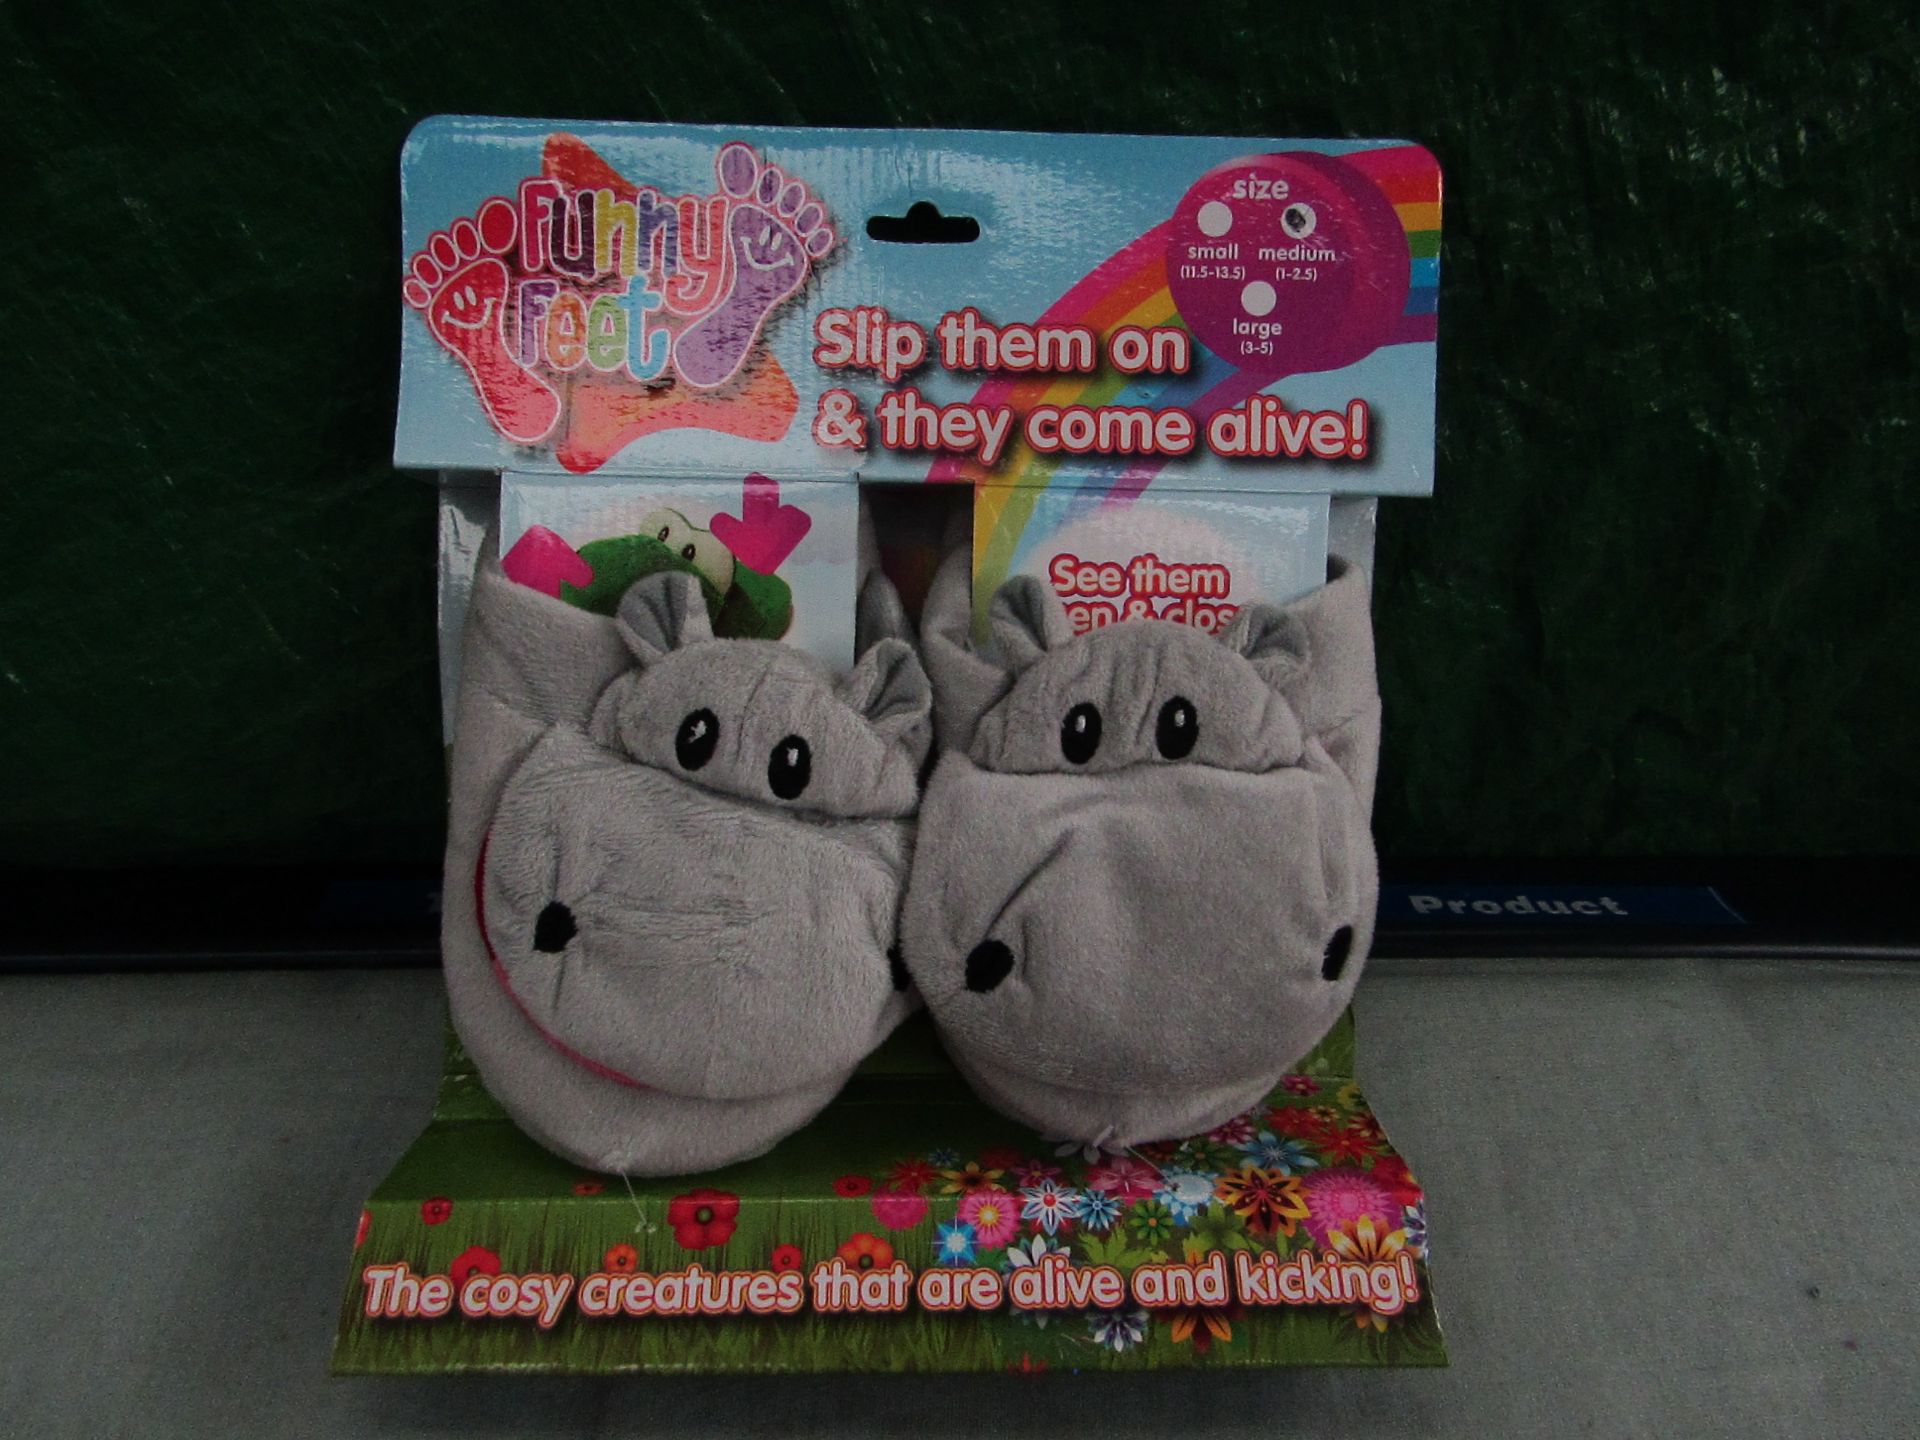 3x Funny Feet - Grey Hippo Slippers - Size Small 11.5 - 13.5 - Unused & Packaged.